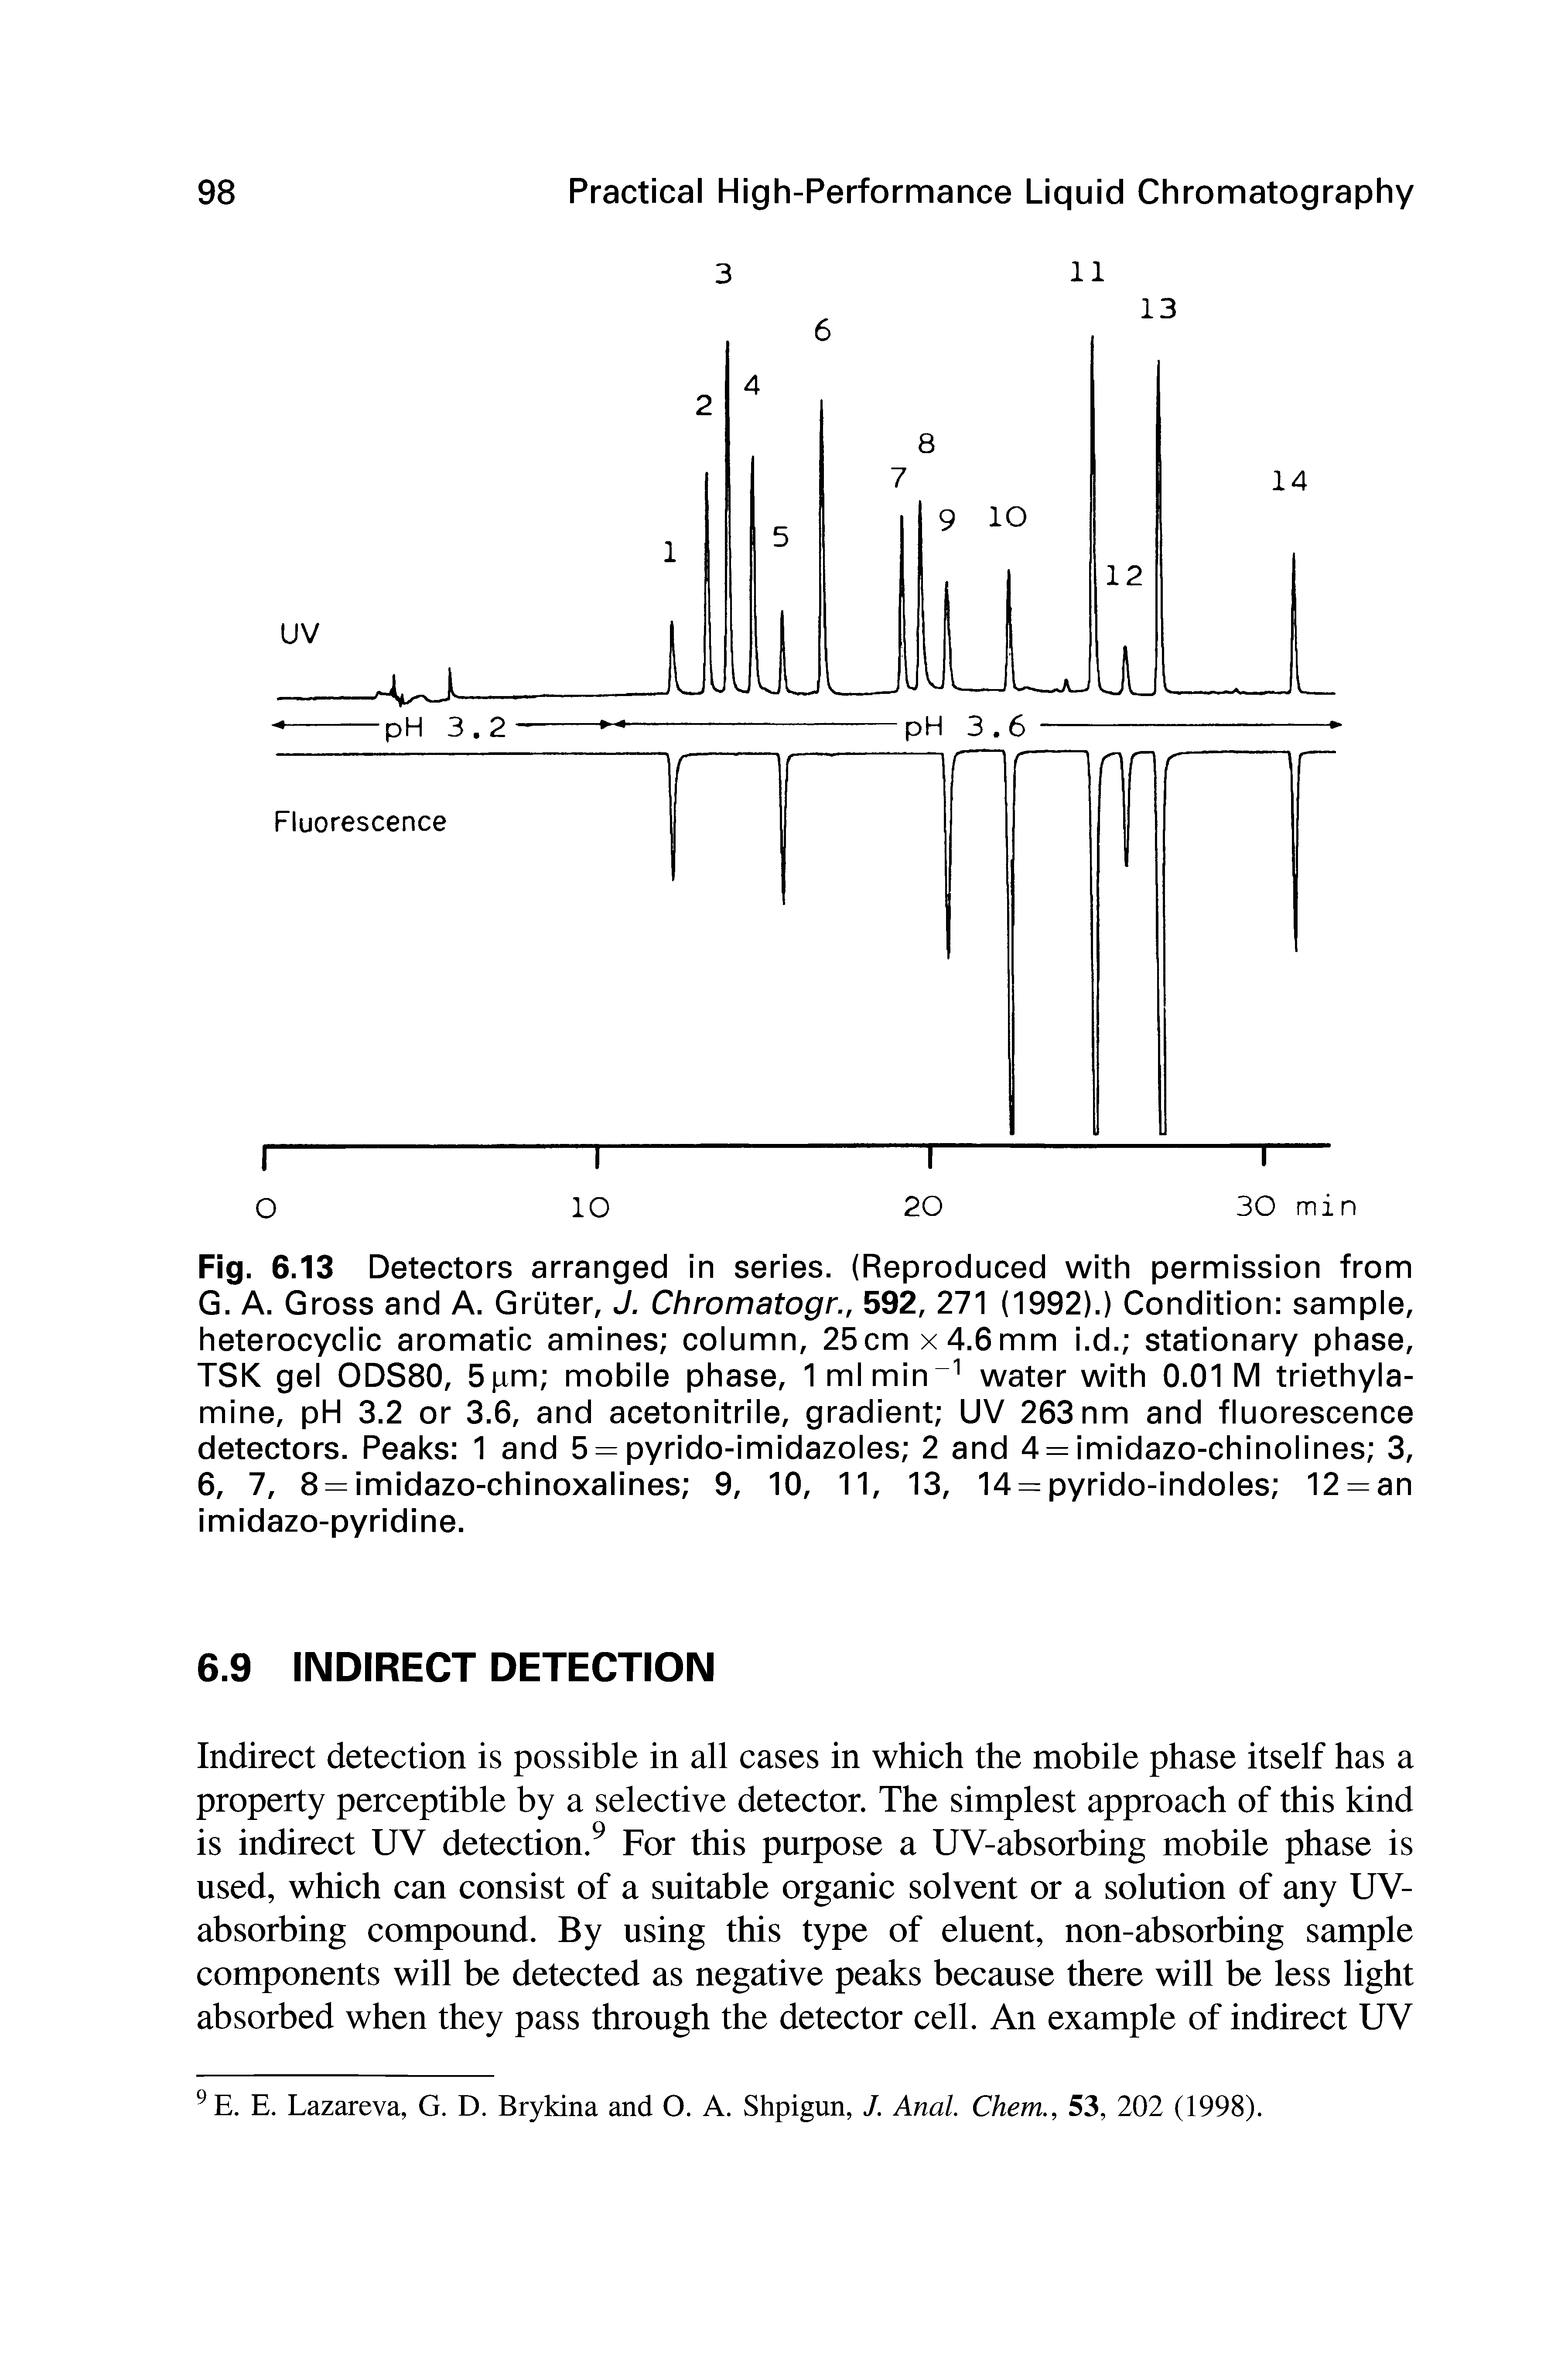 Fig. 6.13 Detectors arranged in series. (Reproduced with permission from G. A. Gross and A. Gruter, J. Chromatogr., 592, 271 (1992).) Condition sample, heterocyclic aromatic amines column, 25cmx4.6mm i.d. stationary phase, TSK gel ODS80, 5iam mobile phase, 1 ml min water with 0.01 M triethyla-mine, pH 3.2 or 3.6, and acetonitrile, gradient UV 263 nm and fluorescence detectors. Peaks 1 and 5 = pyrido-imidazoles 2 and 4 = imidazo-chinolines 3, 6, 7, 8 = imidazo-chinoxalines 9, 10, 11, 13, 14 = pyrido-indoles 12 = an imidazo-pyridine.